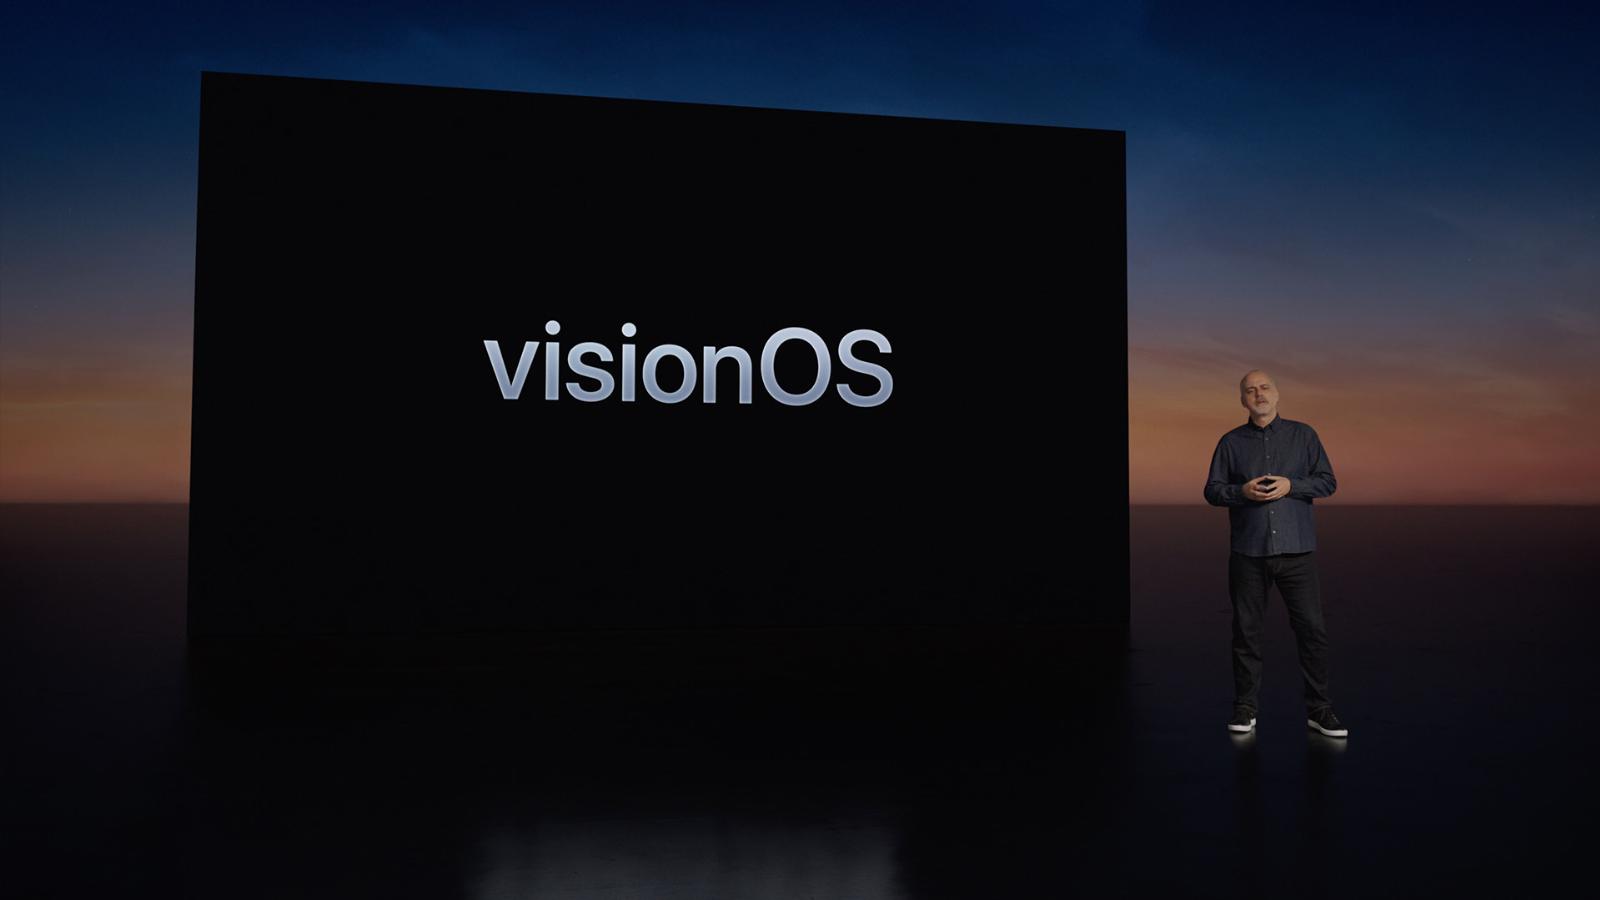 VisionOS is Apple’s latest operating system